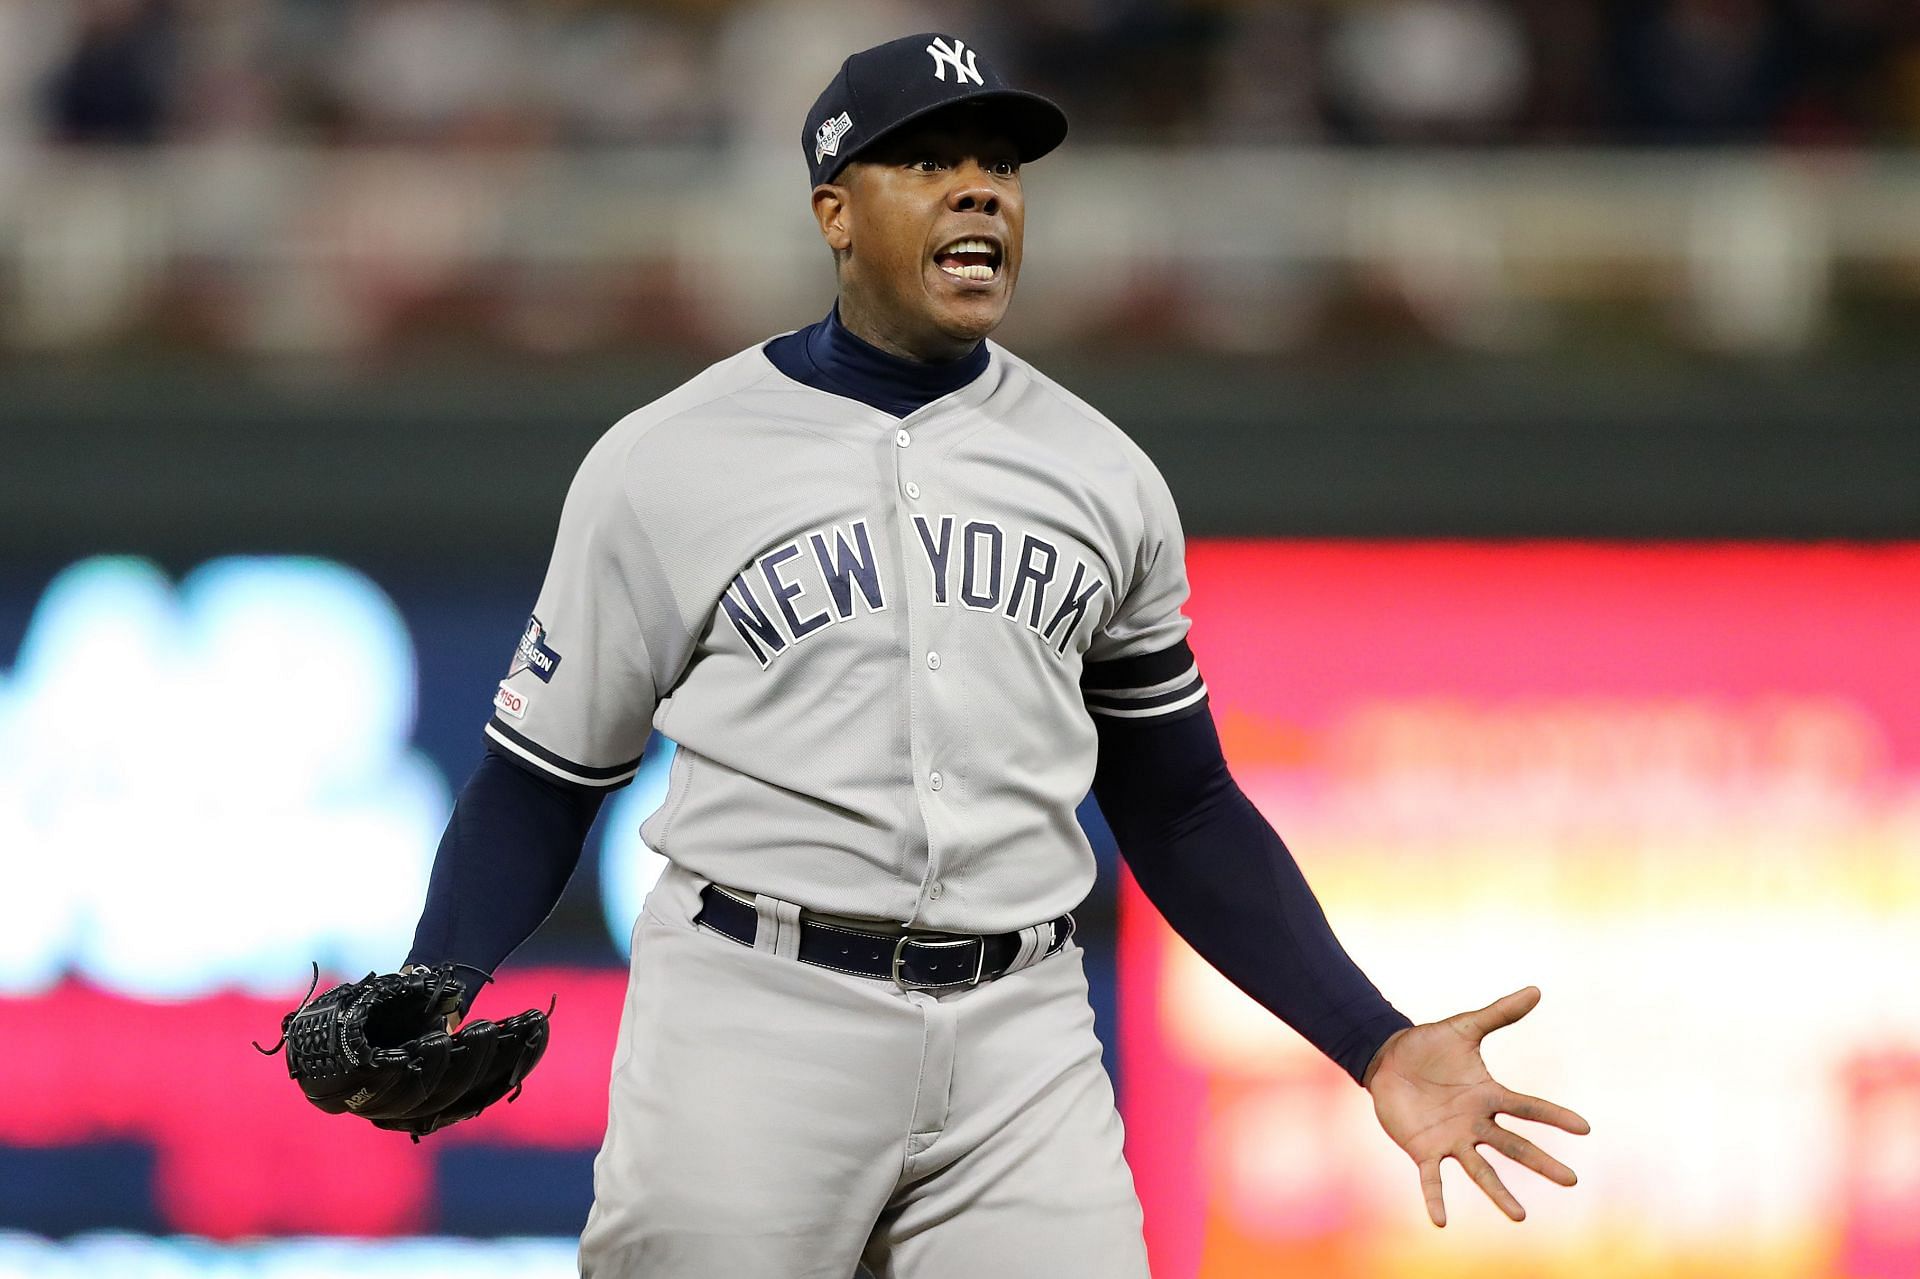 Yankees Pitcher Aroldis Chapman Suspended 30 Games for Allegedly